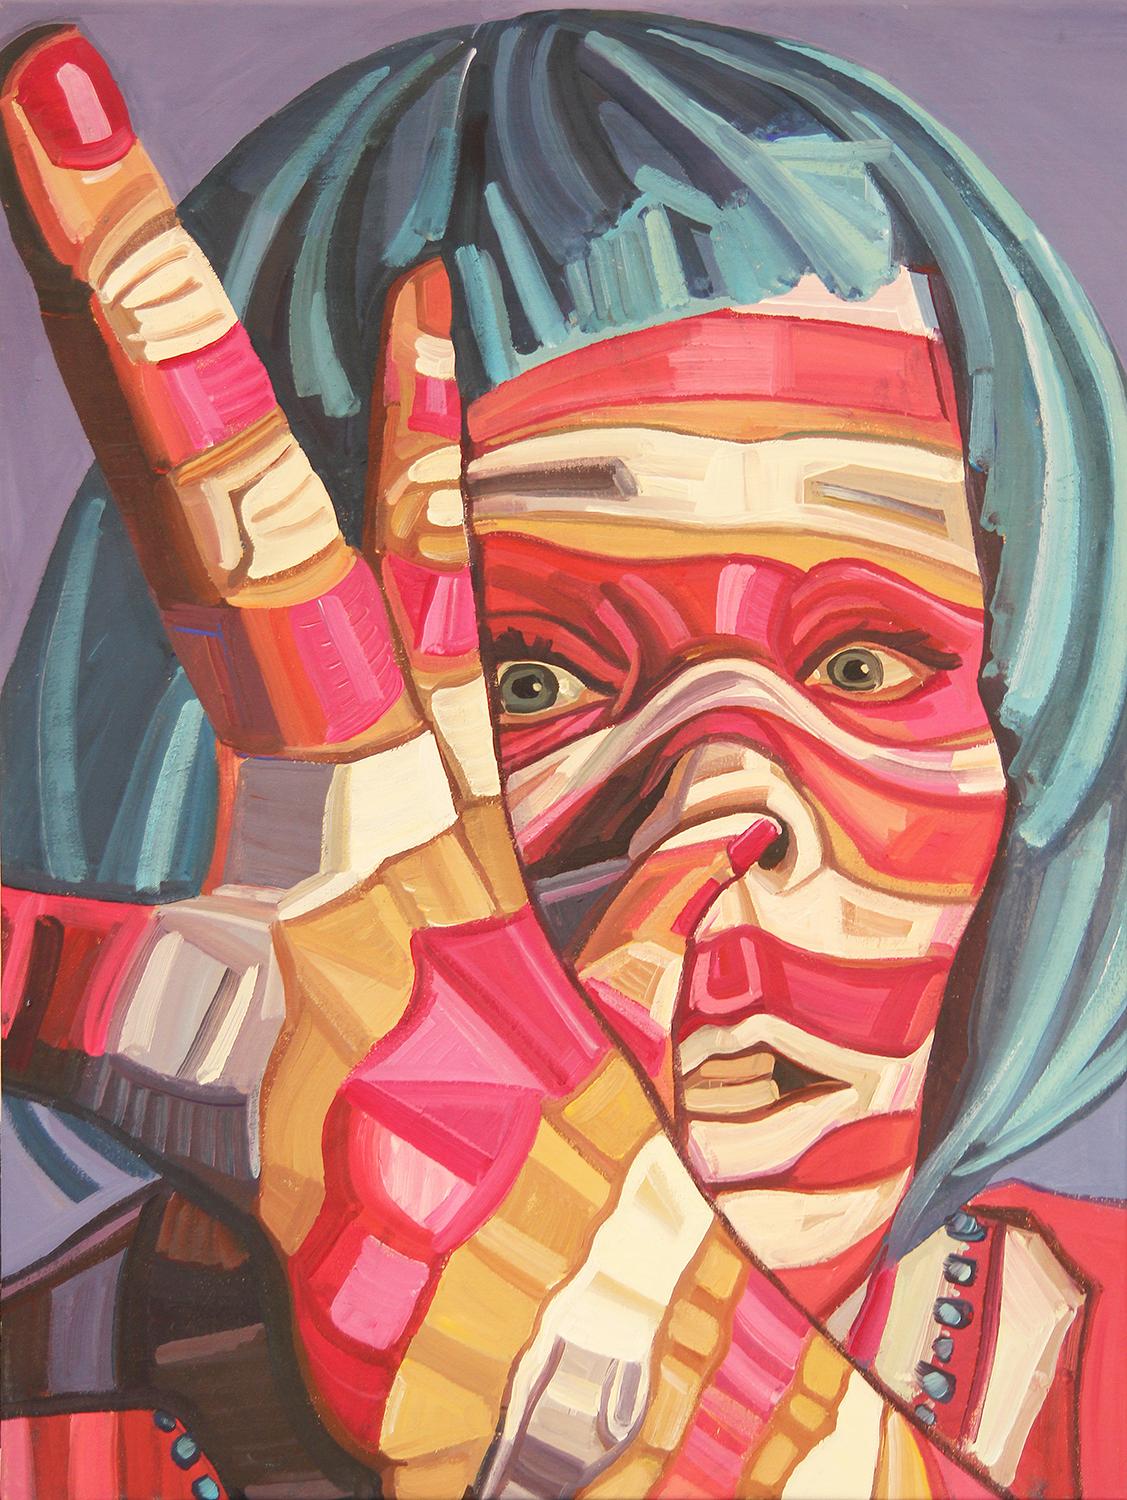 Saralene Tapley Figurative Painting - "Self Portrait with Pink and White Stripes 2" Red, White, & Blue Self Portrait